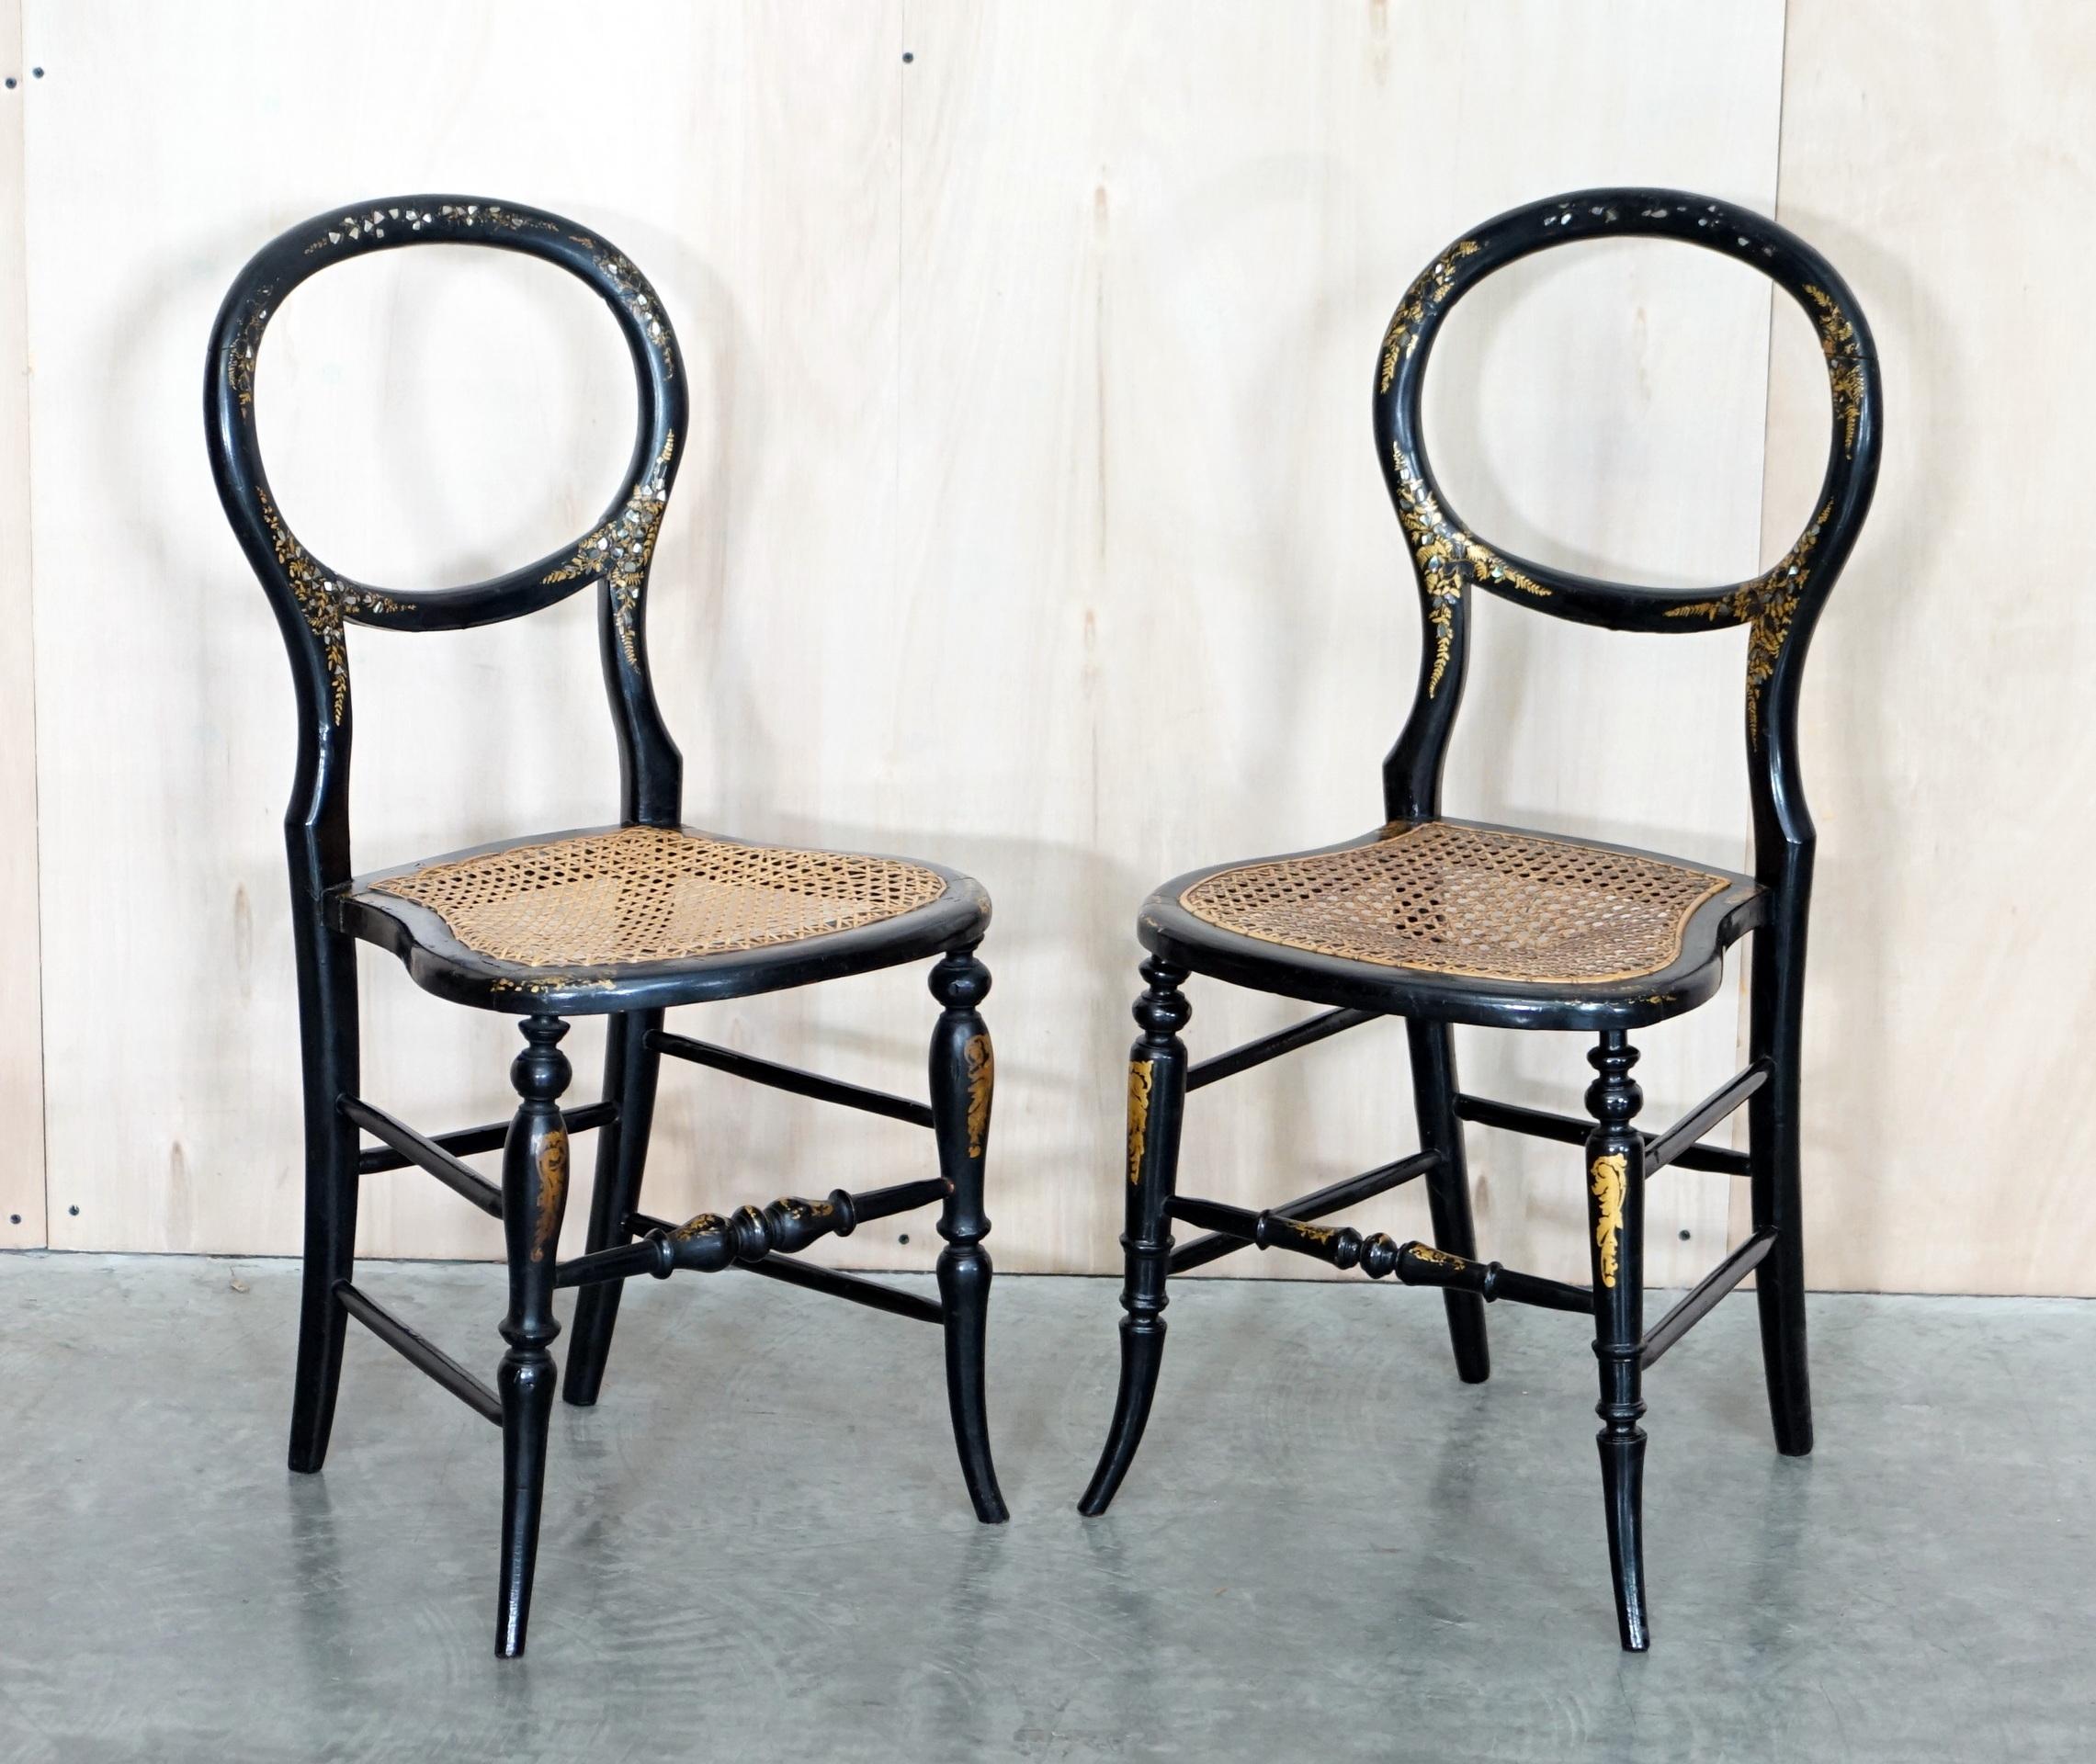 We are delighted to offer for sale this lovely pair of original circa 1810-1820 Regency bergere ebonised with mother of pearl inlay side chairs and matching tray table 

A very good looking well made and decorative suite. In truth, they rarely